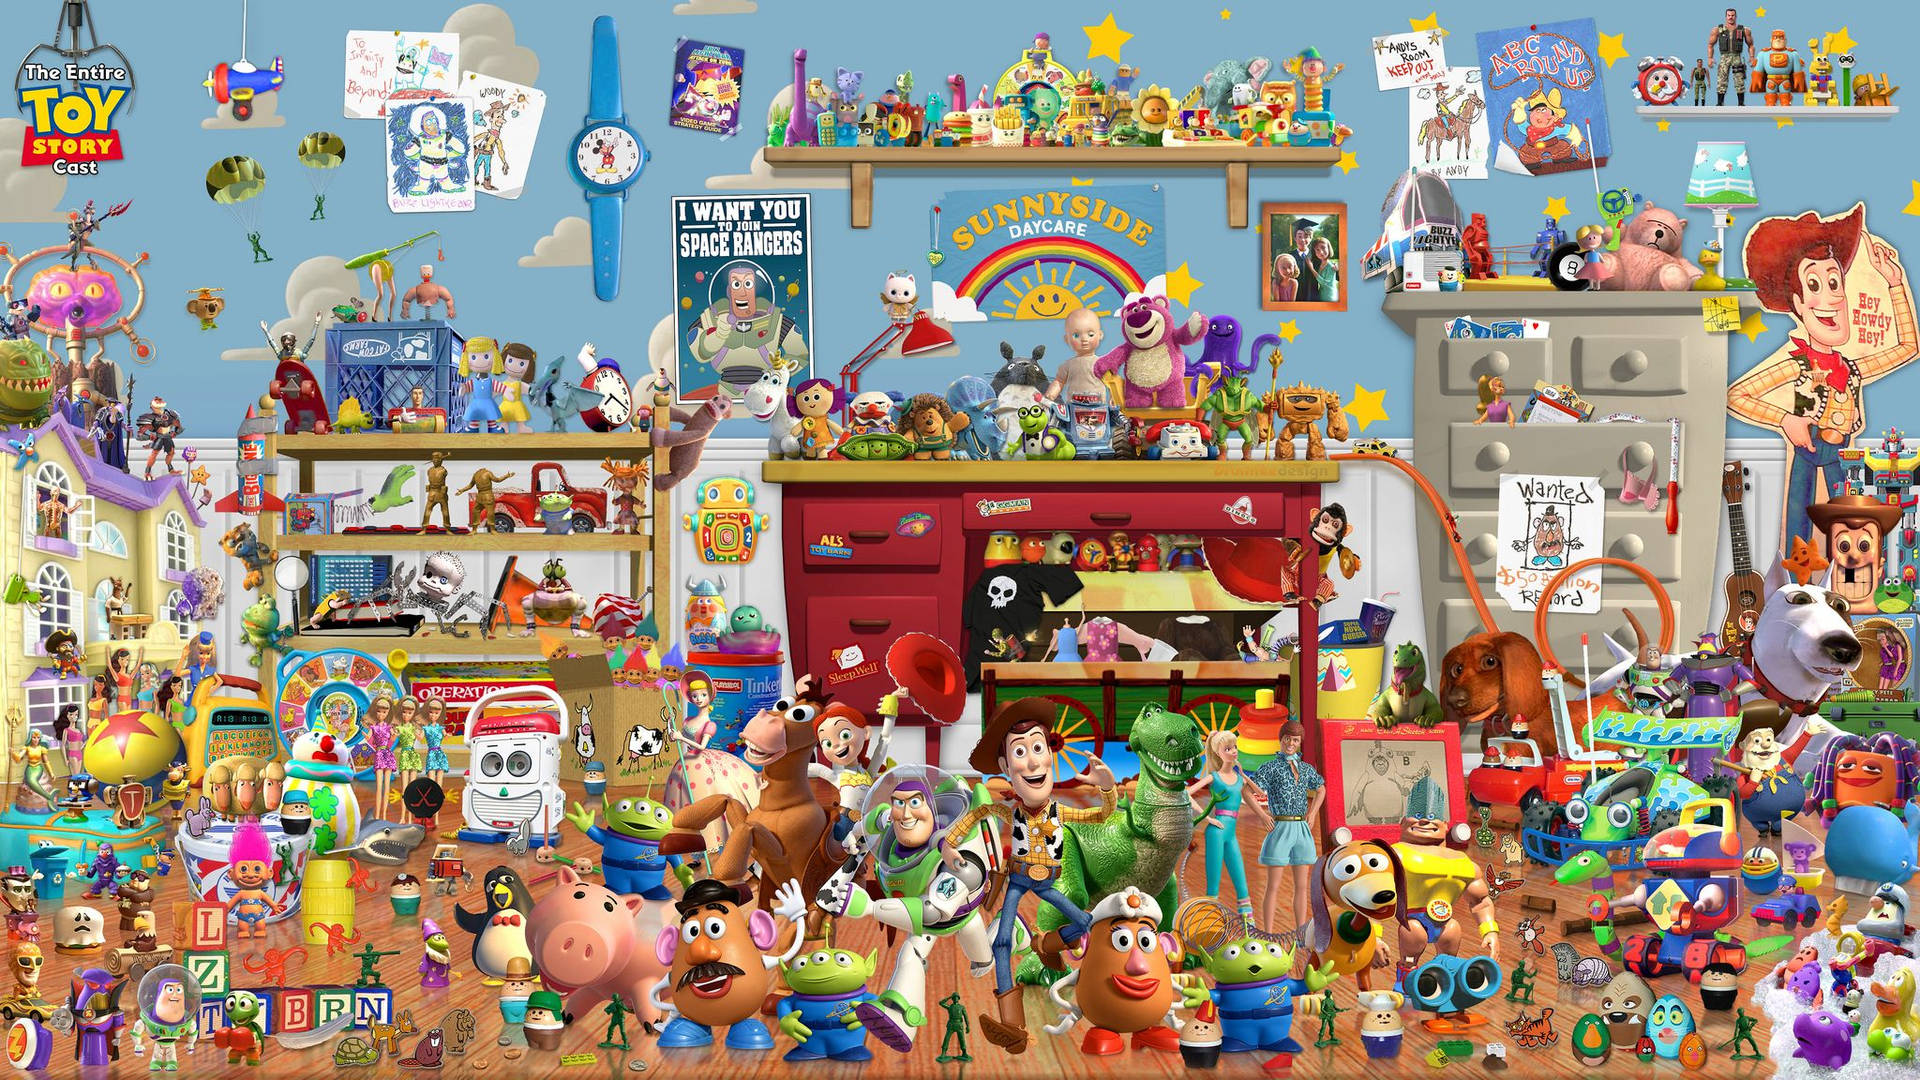 Toy Story Whole Characters Wallpaper